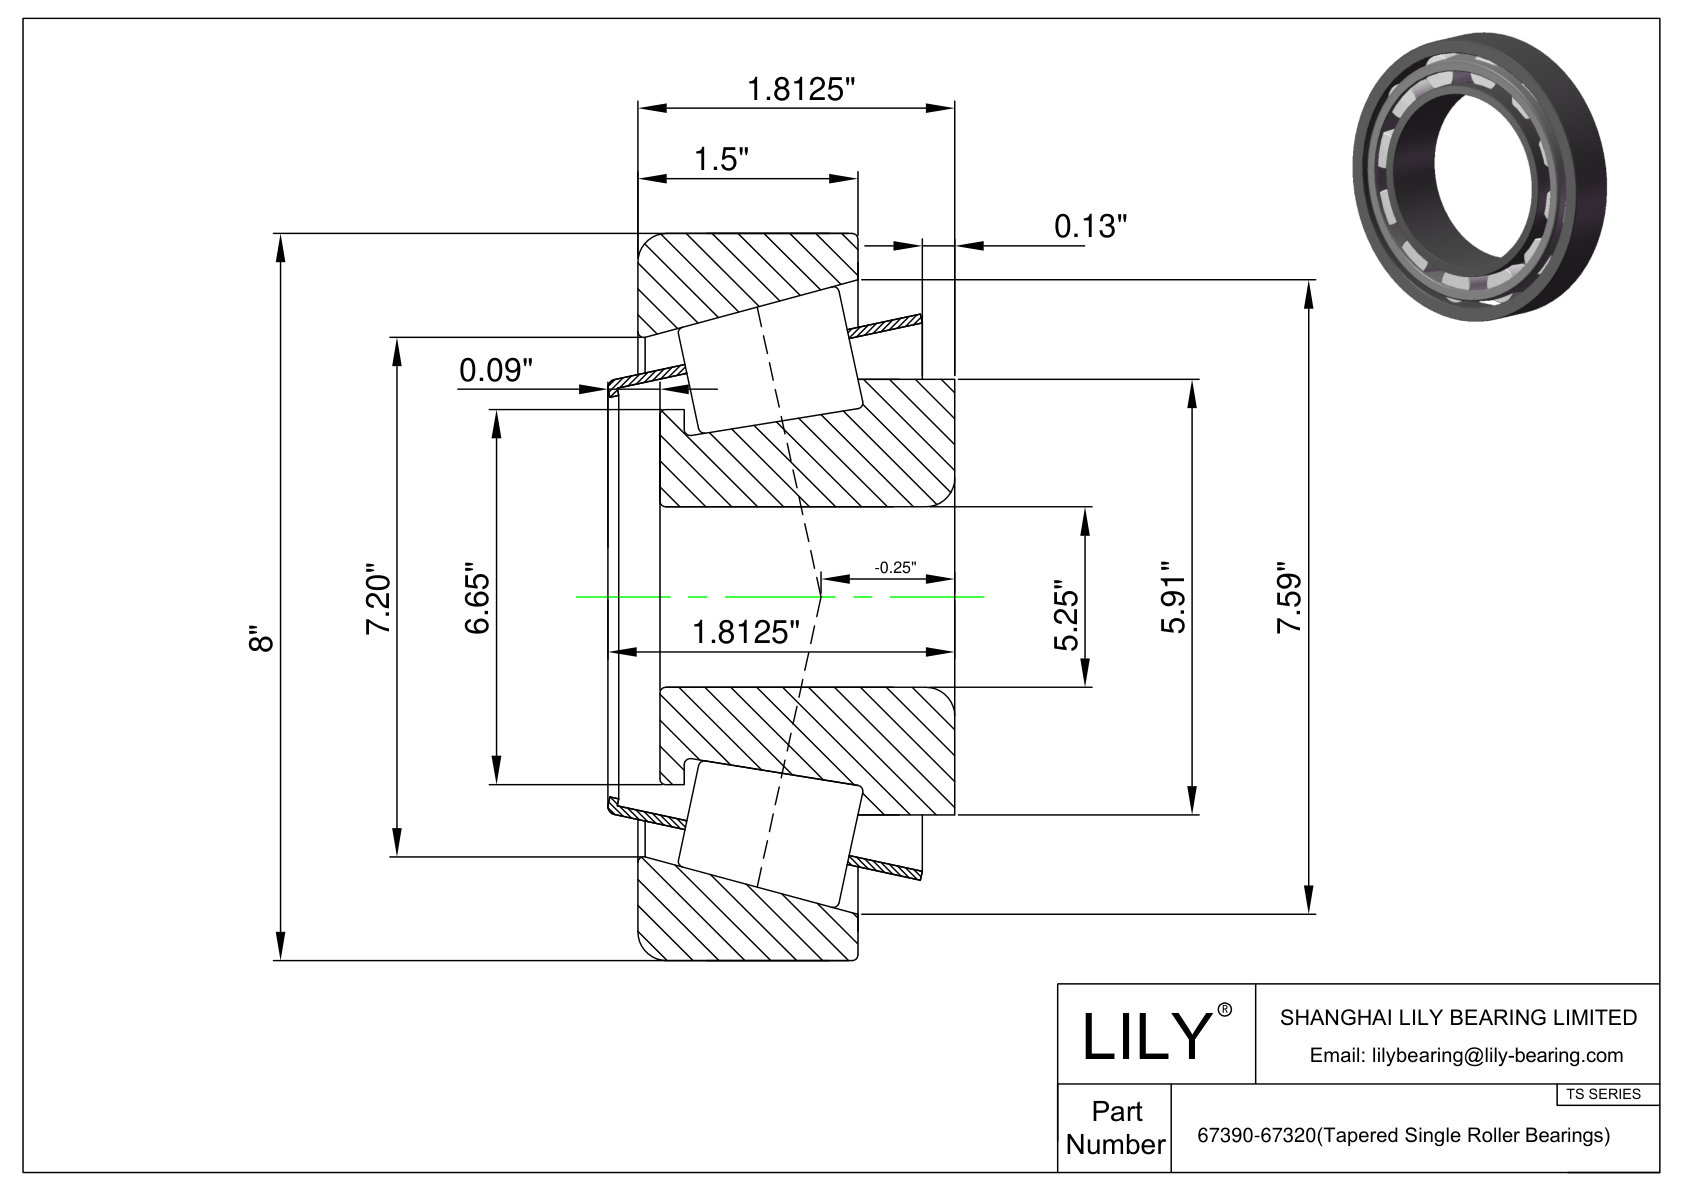 67390-67320 TS (Tapered Single Roller Bearings) (Imperial) cad drawing